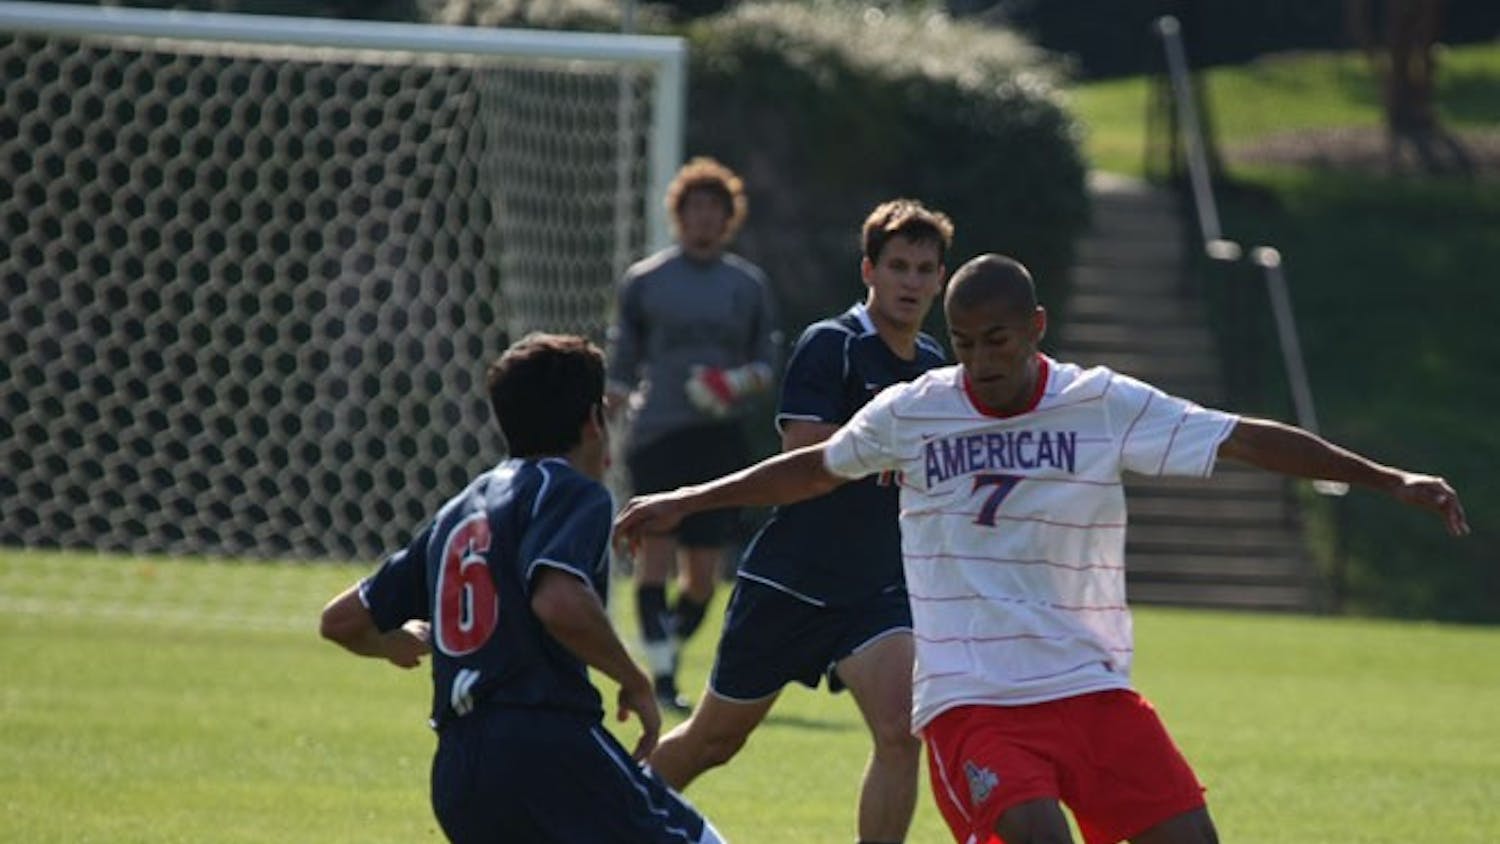 MAKING IT INTERESTING â€” Sophomore forward Jack Scott takes the ball up field on a fancy move in the teamâ€™s 2-1 win. It was the second straight double overtime game for the Eagles and again they pulled out a win. With the win, AU improves to 7-3-1 this season and are 3-0 in the Patriot League, good enough for first place.